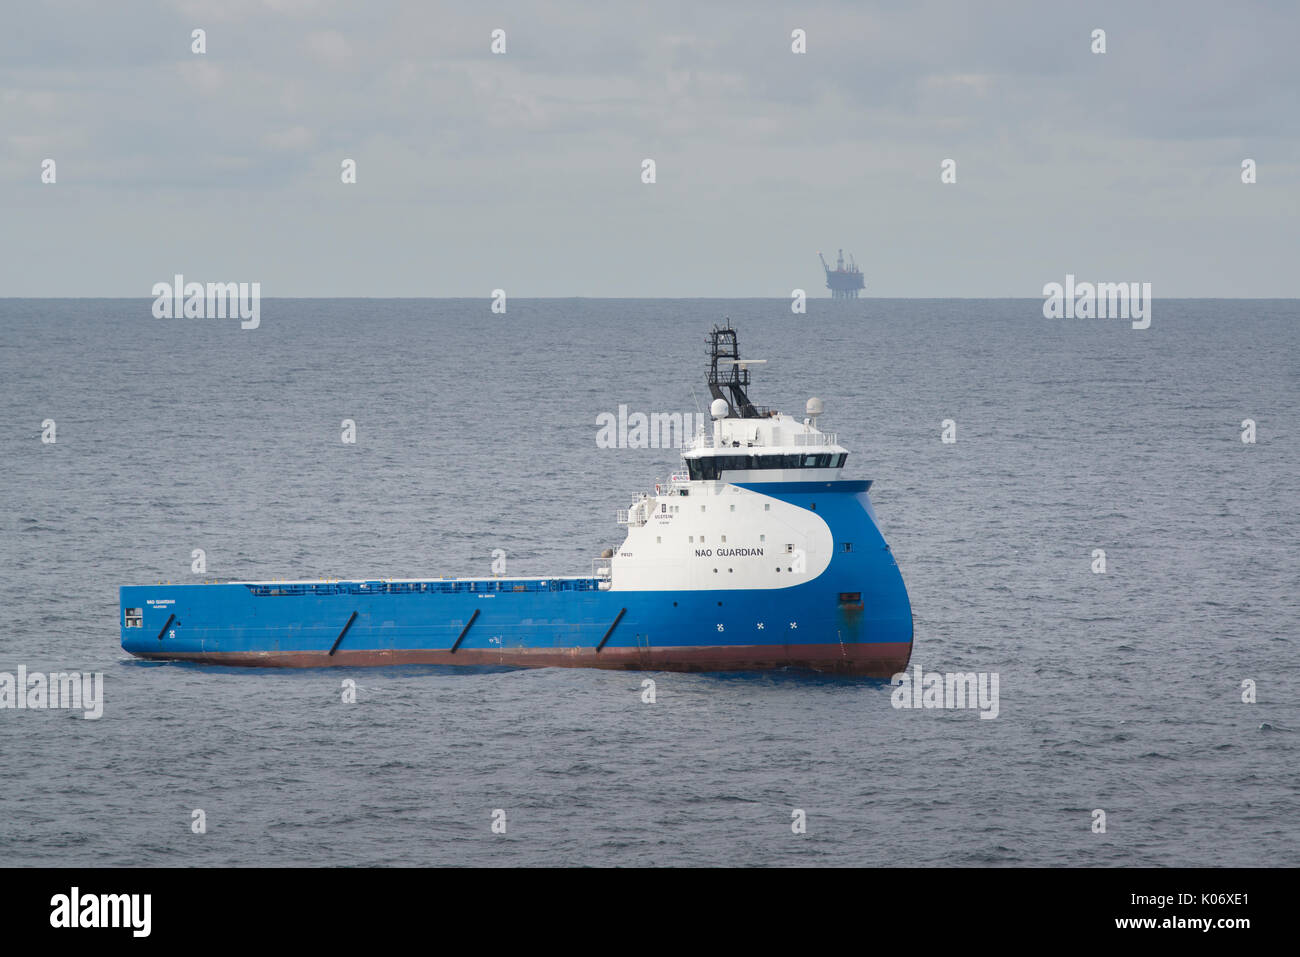 The Nad Guardian supply vessel, working in the North Sea, supplying the oil and gas industry. credit: LEE RAMSDEN / ALAMY Stock Photo